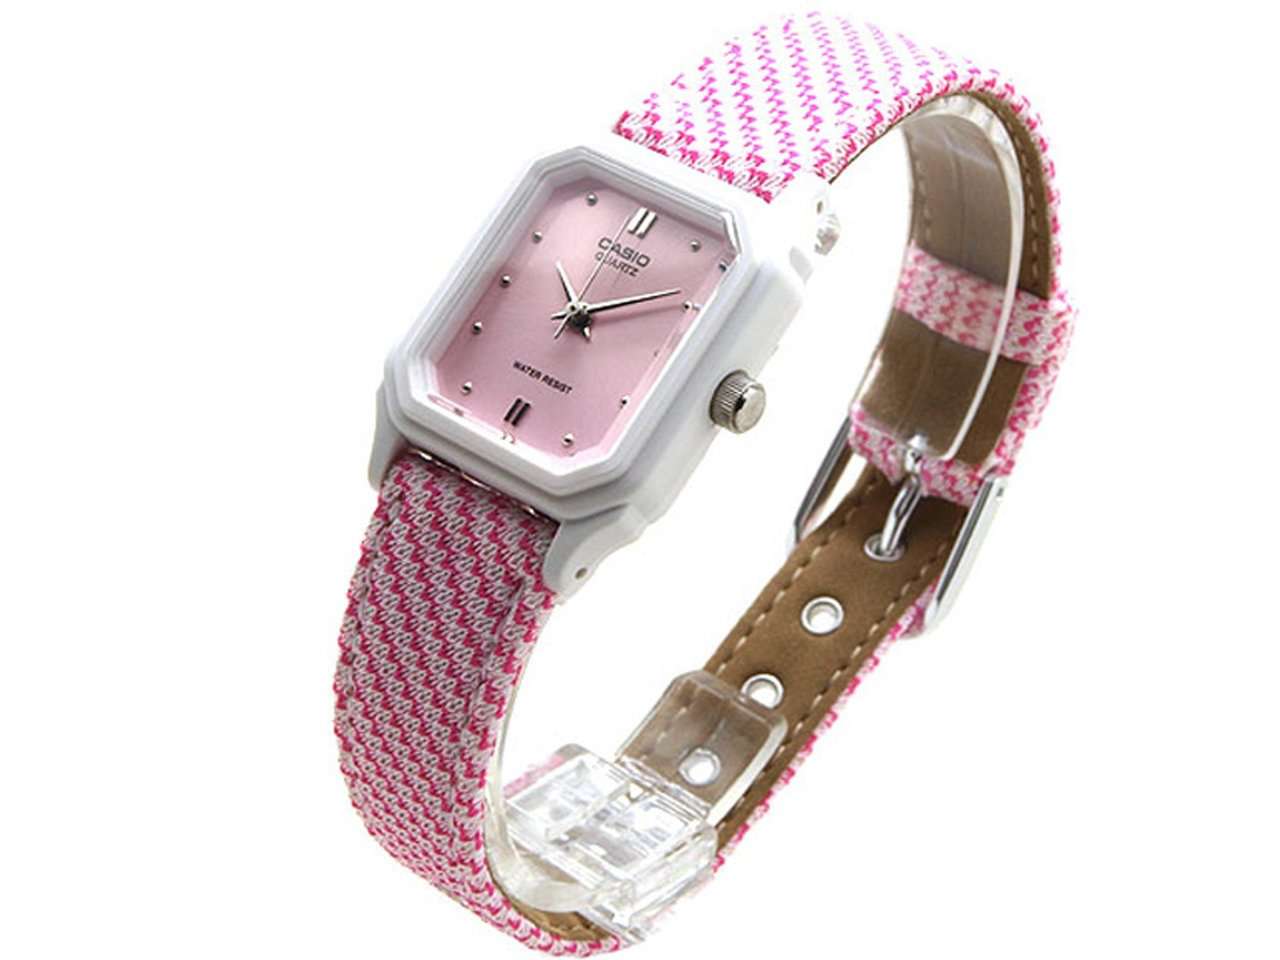 Casio LQ-142LB-4A2DF Pink Leather Strap Watch for Women-Watch Portal Philippines